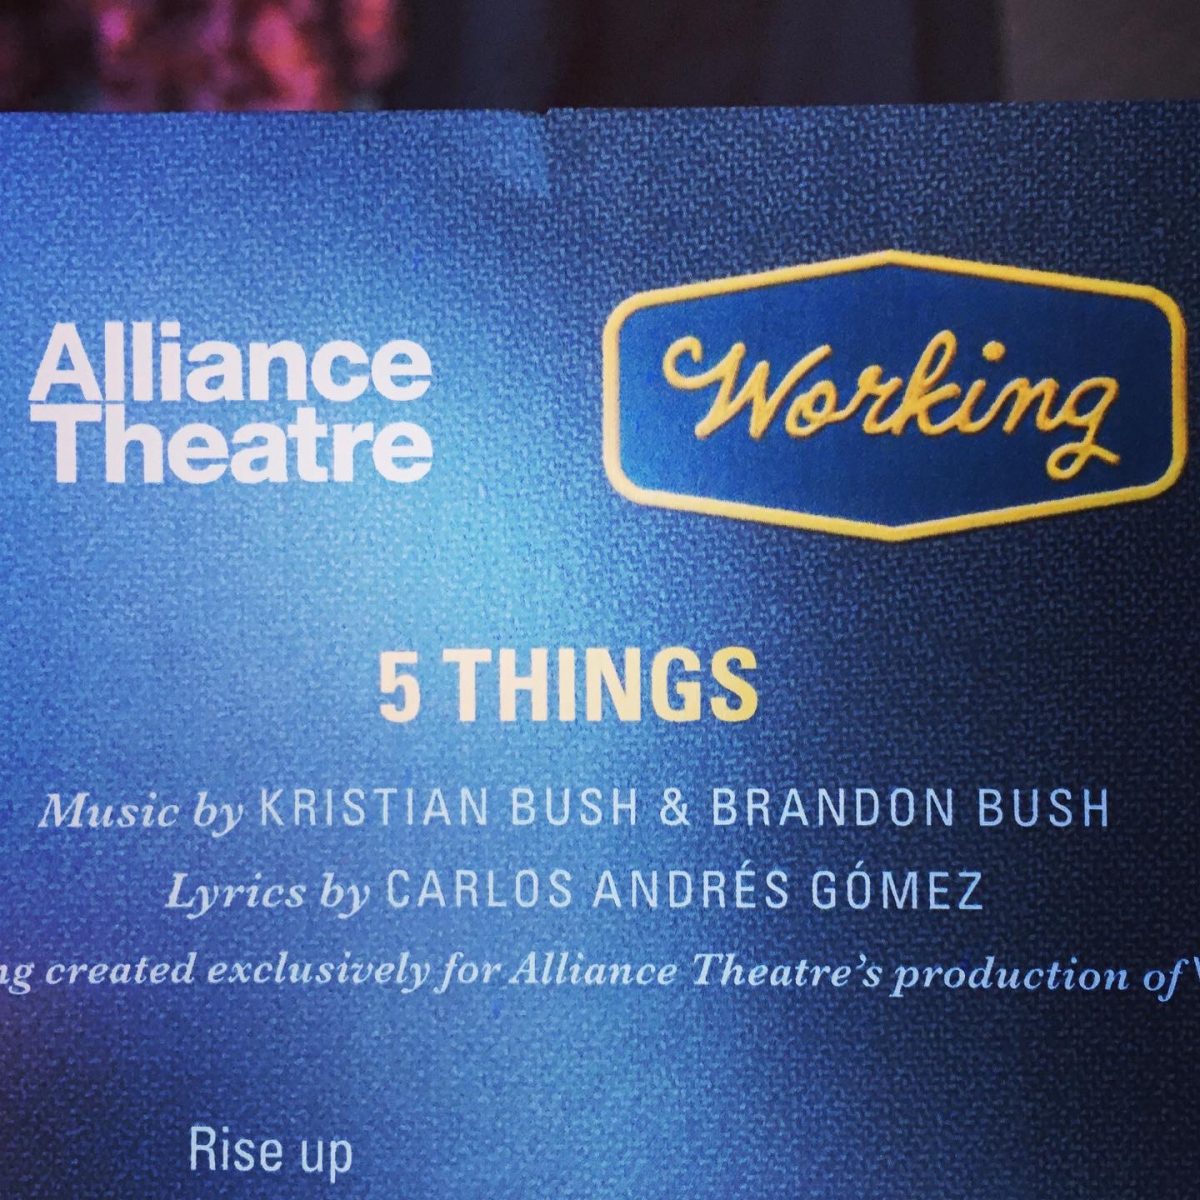 What a thrill to see “5 Things” performed on Opening Night!